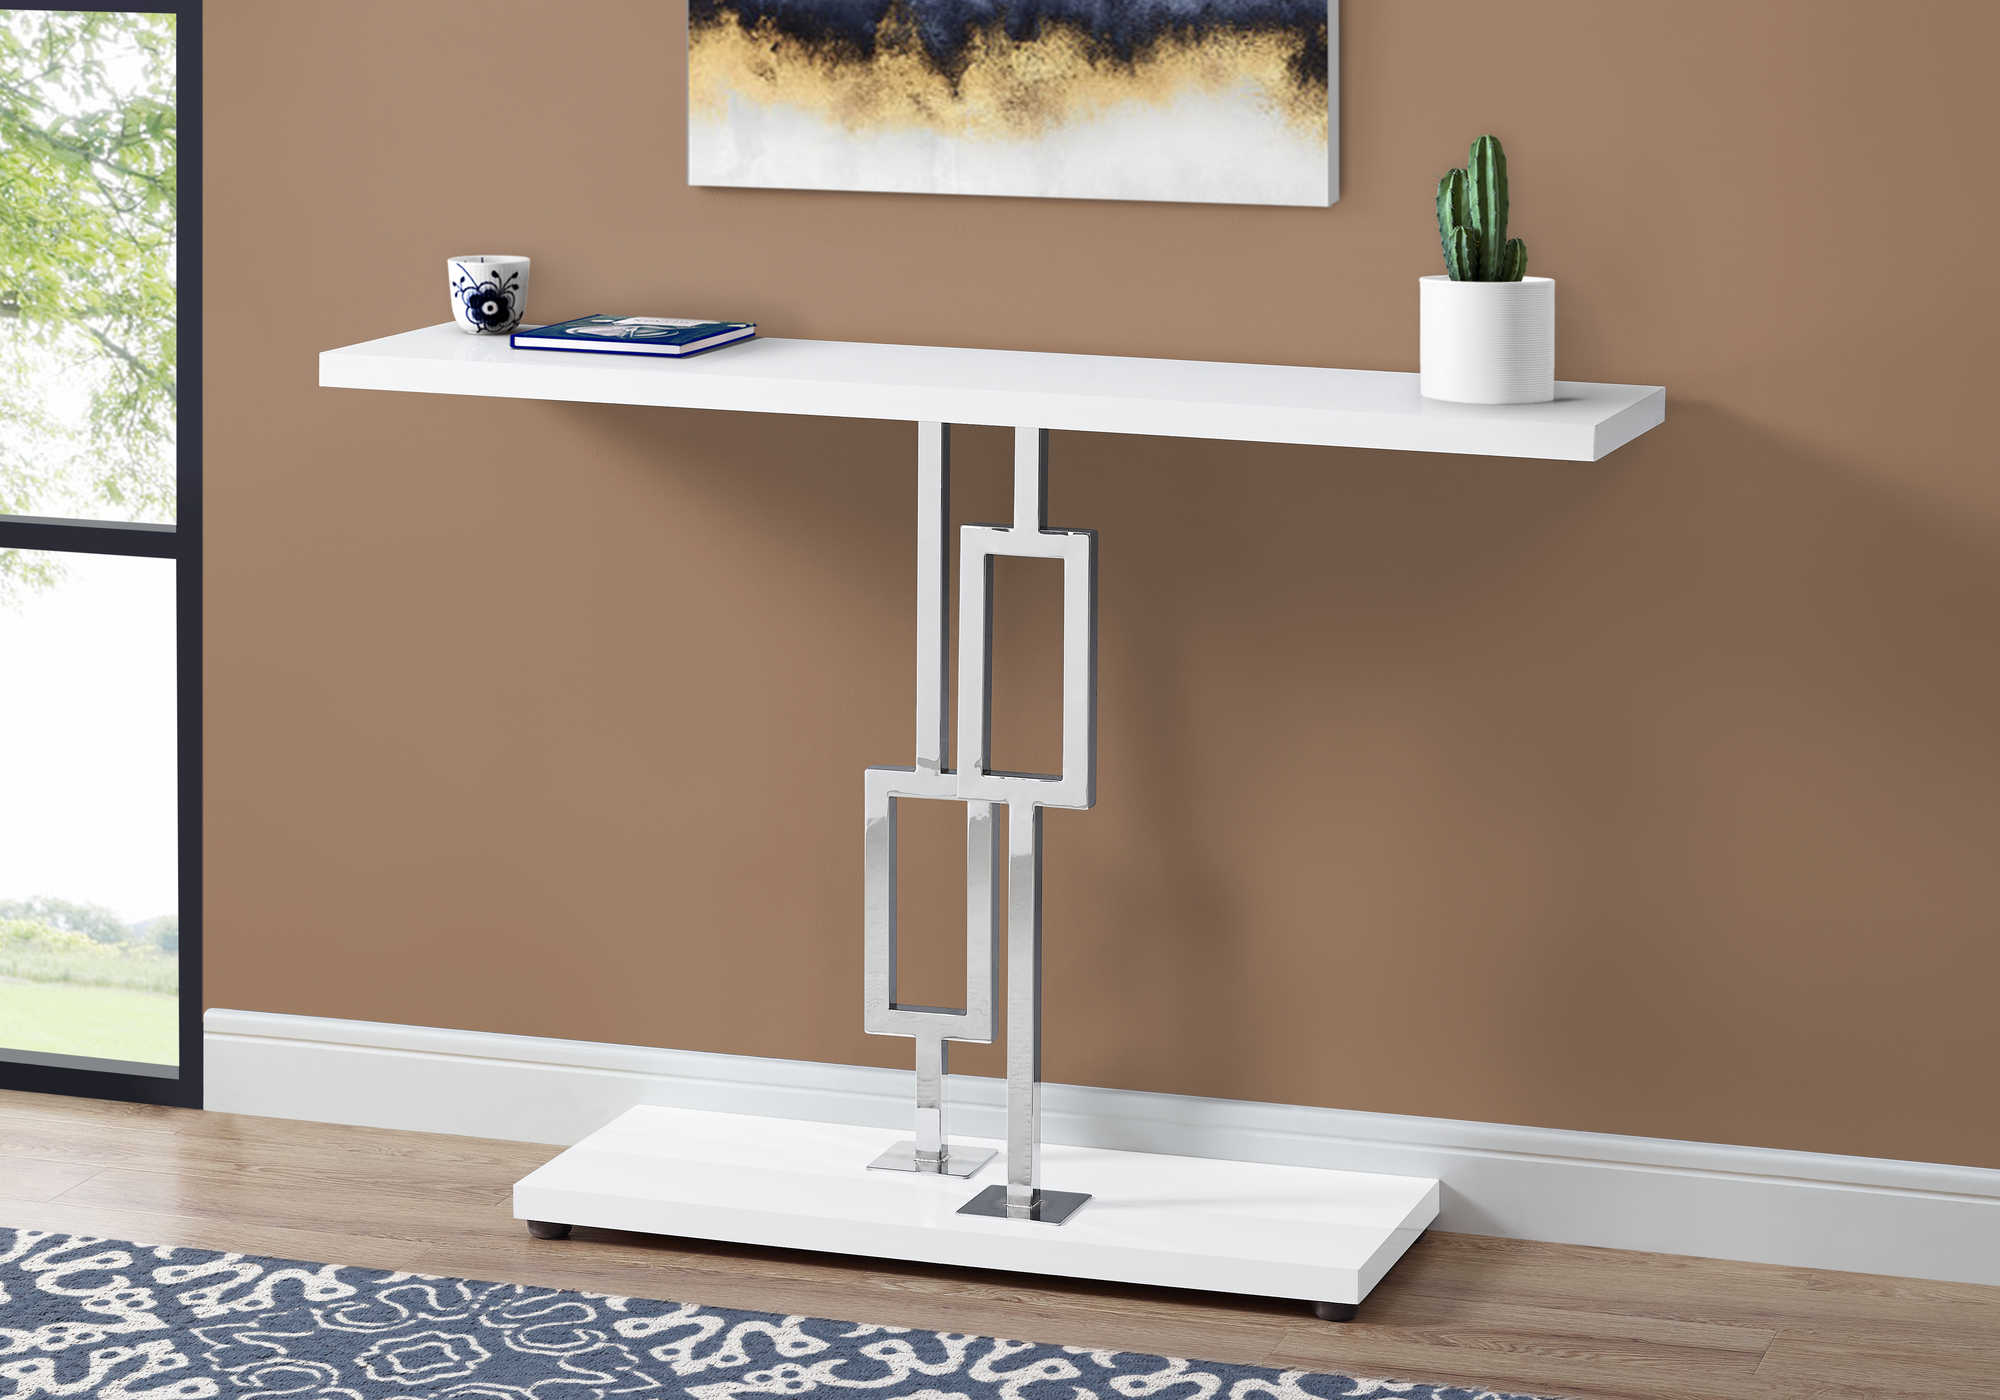 ACCENT TABLE - 48"L / GLOSSY WHITE / CHROME METAL